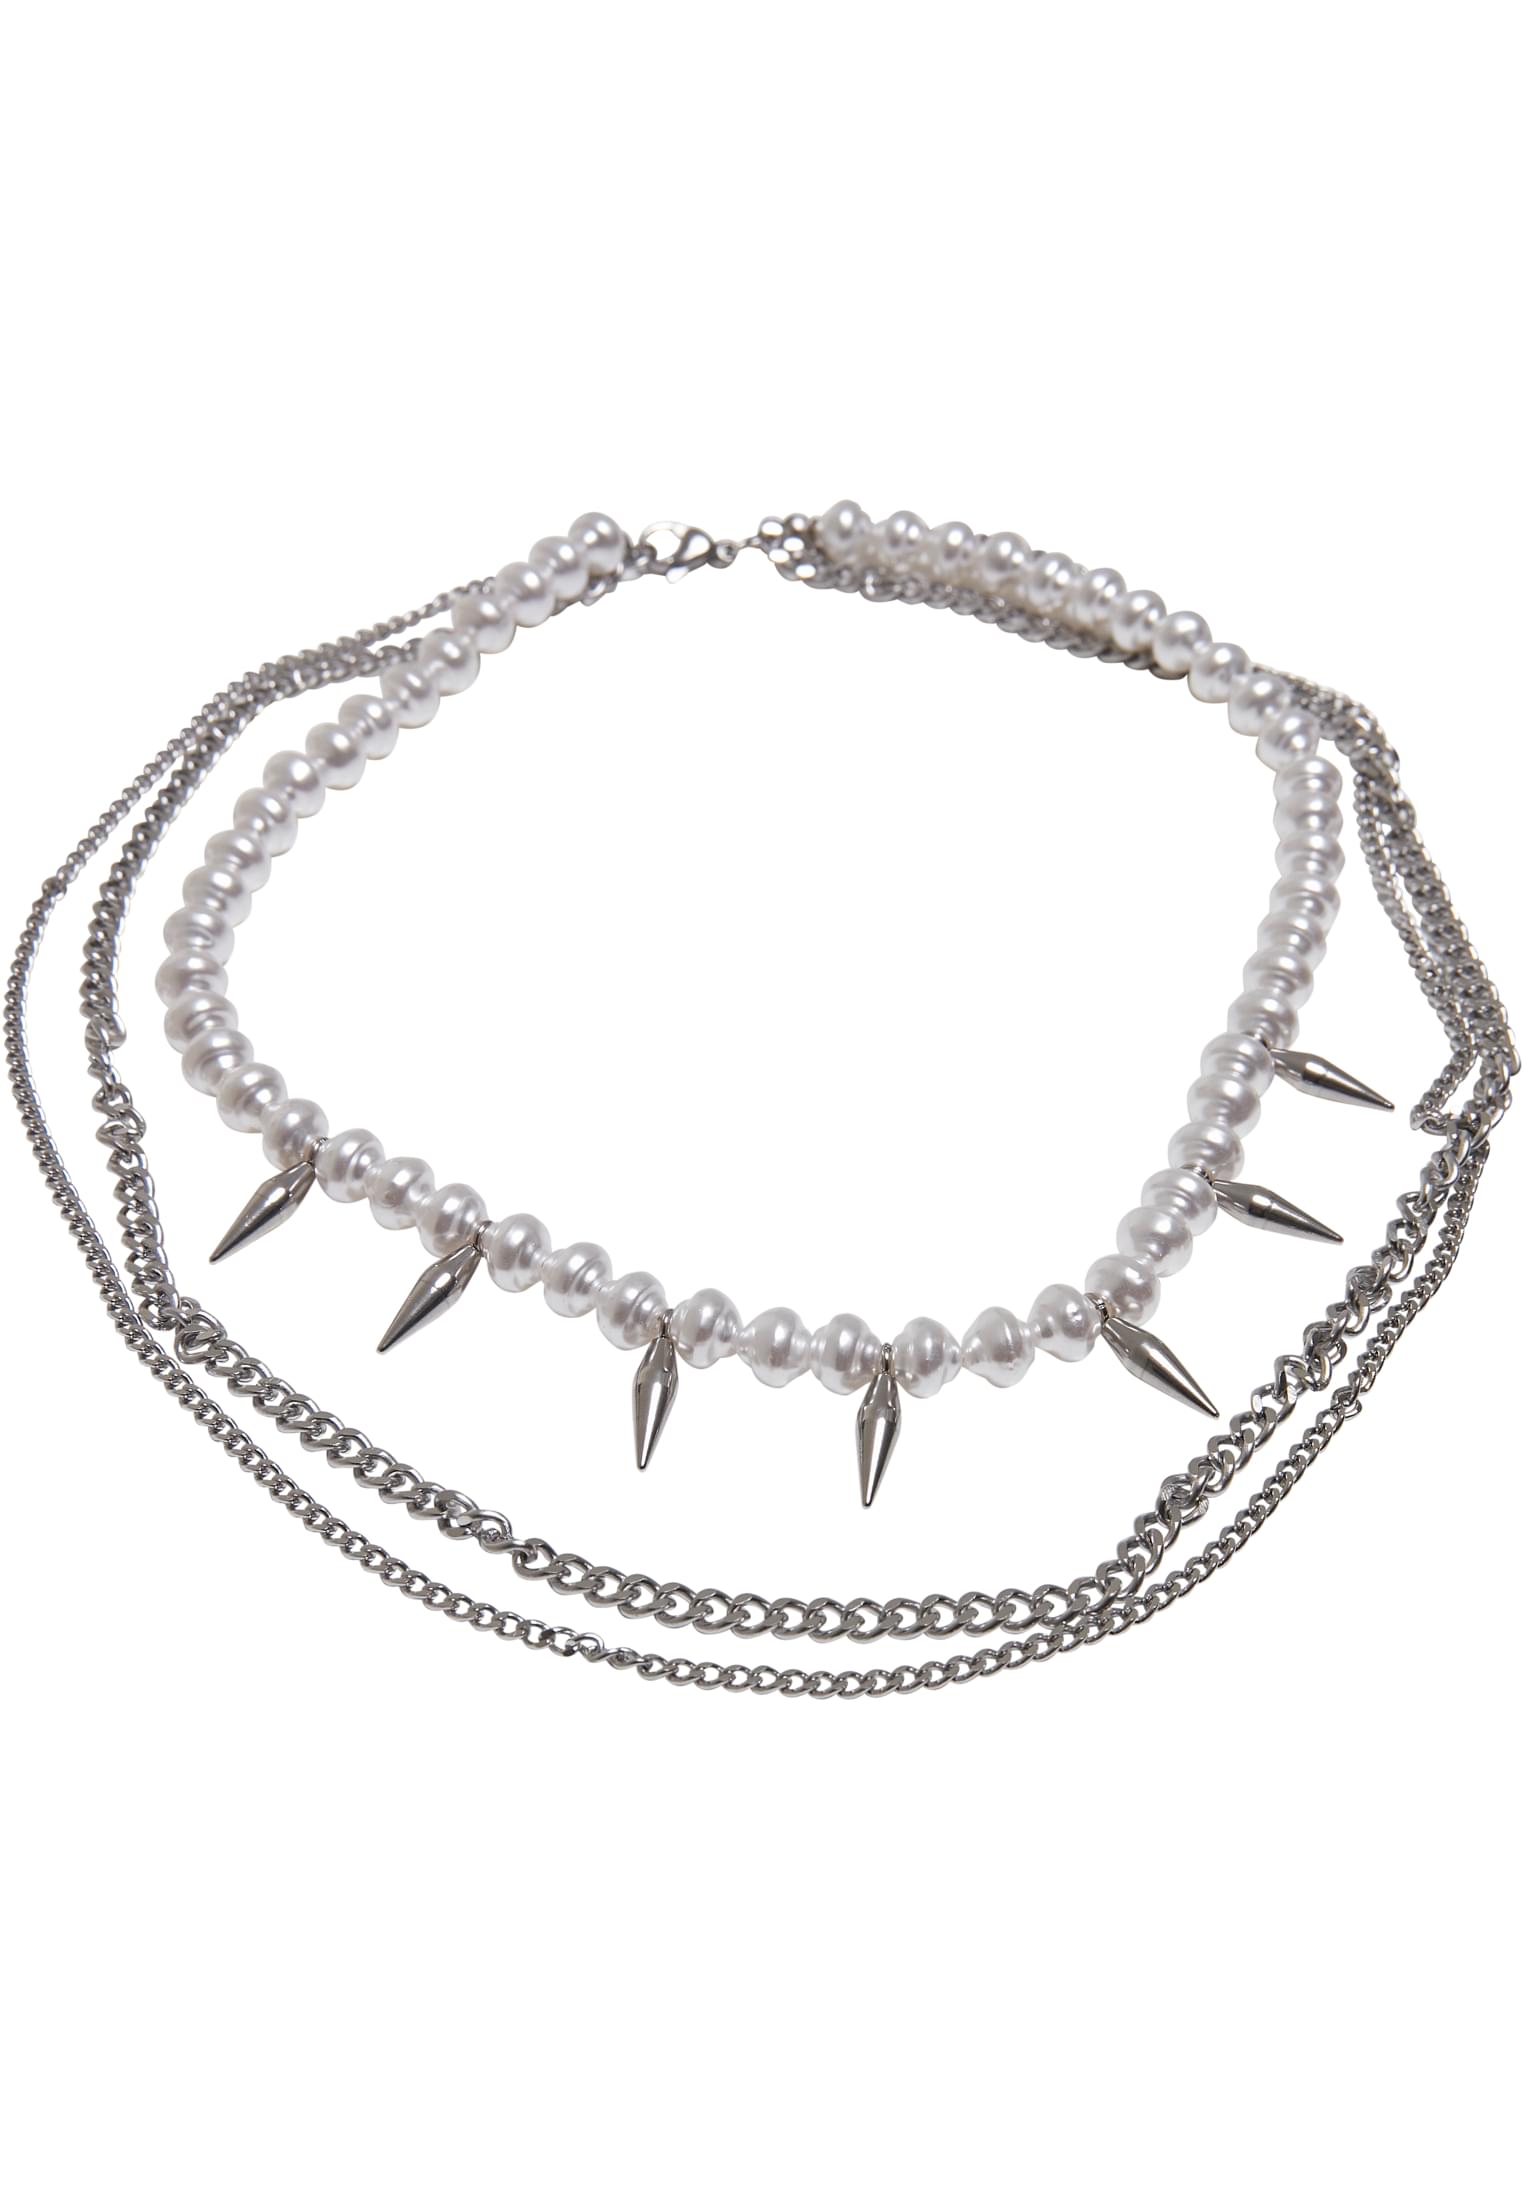 Meridian Pearl Layering Necklace - Silver Color